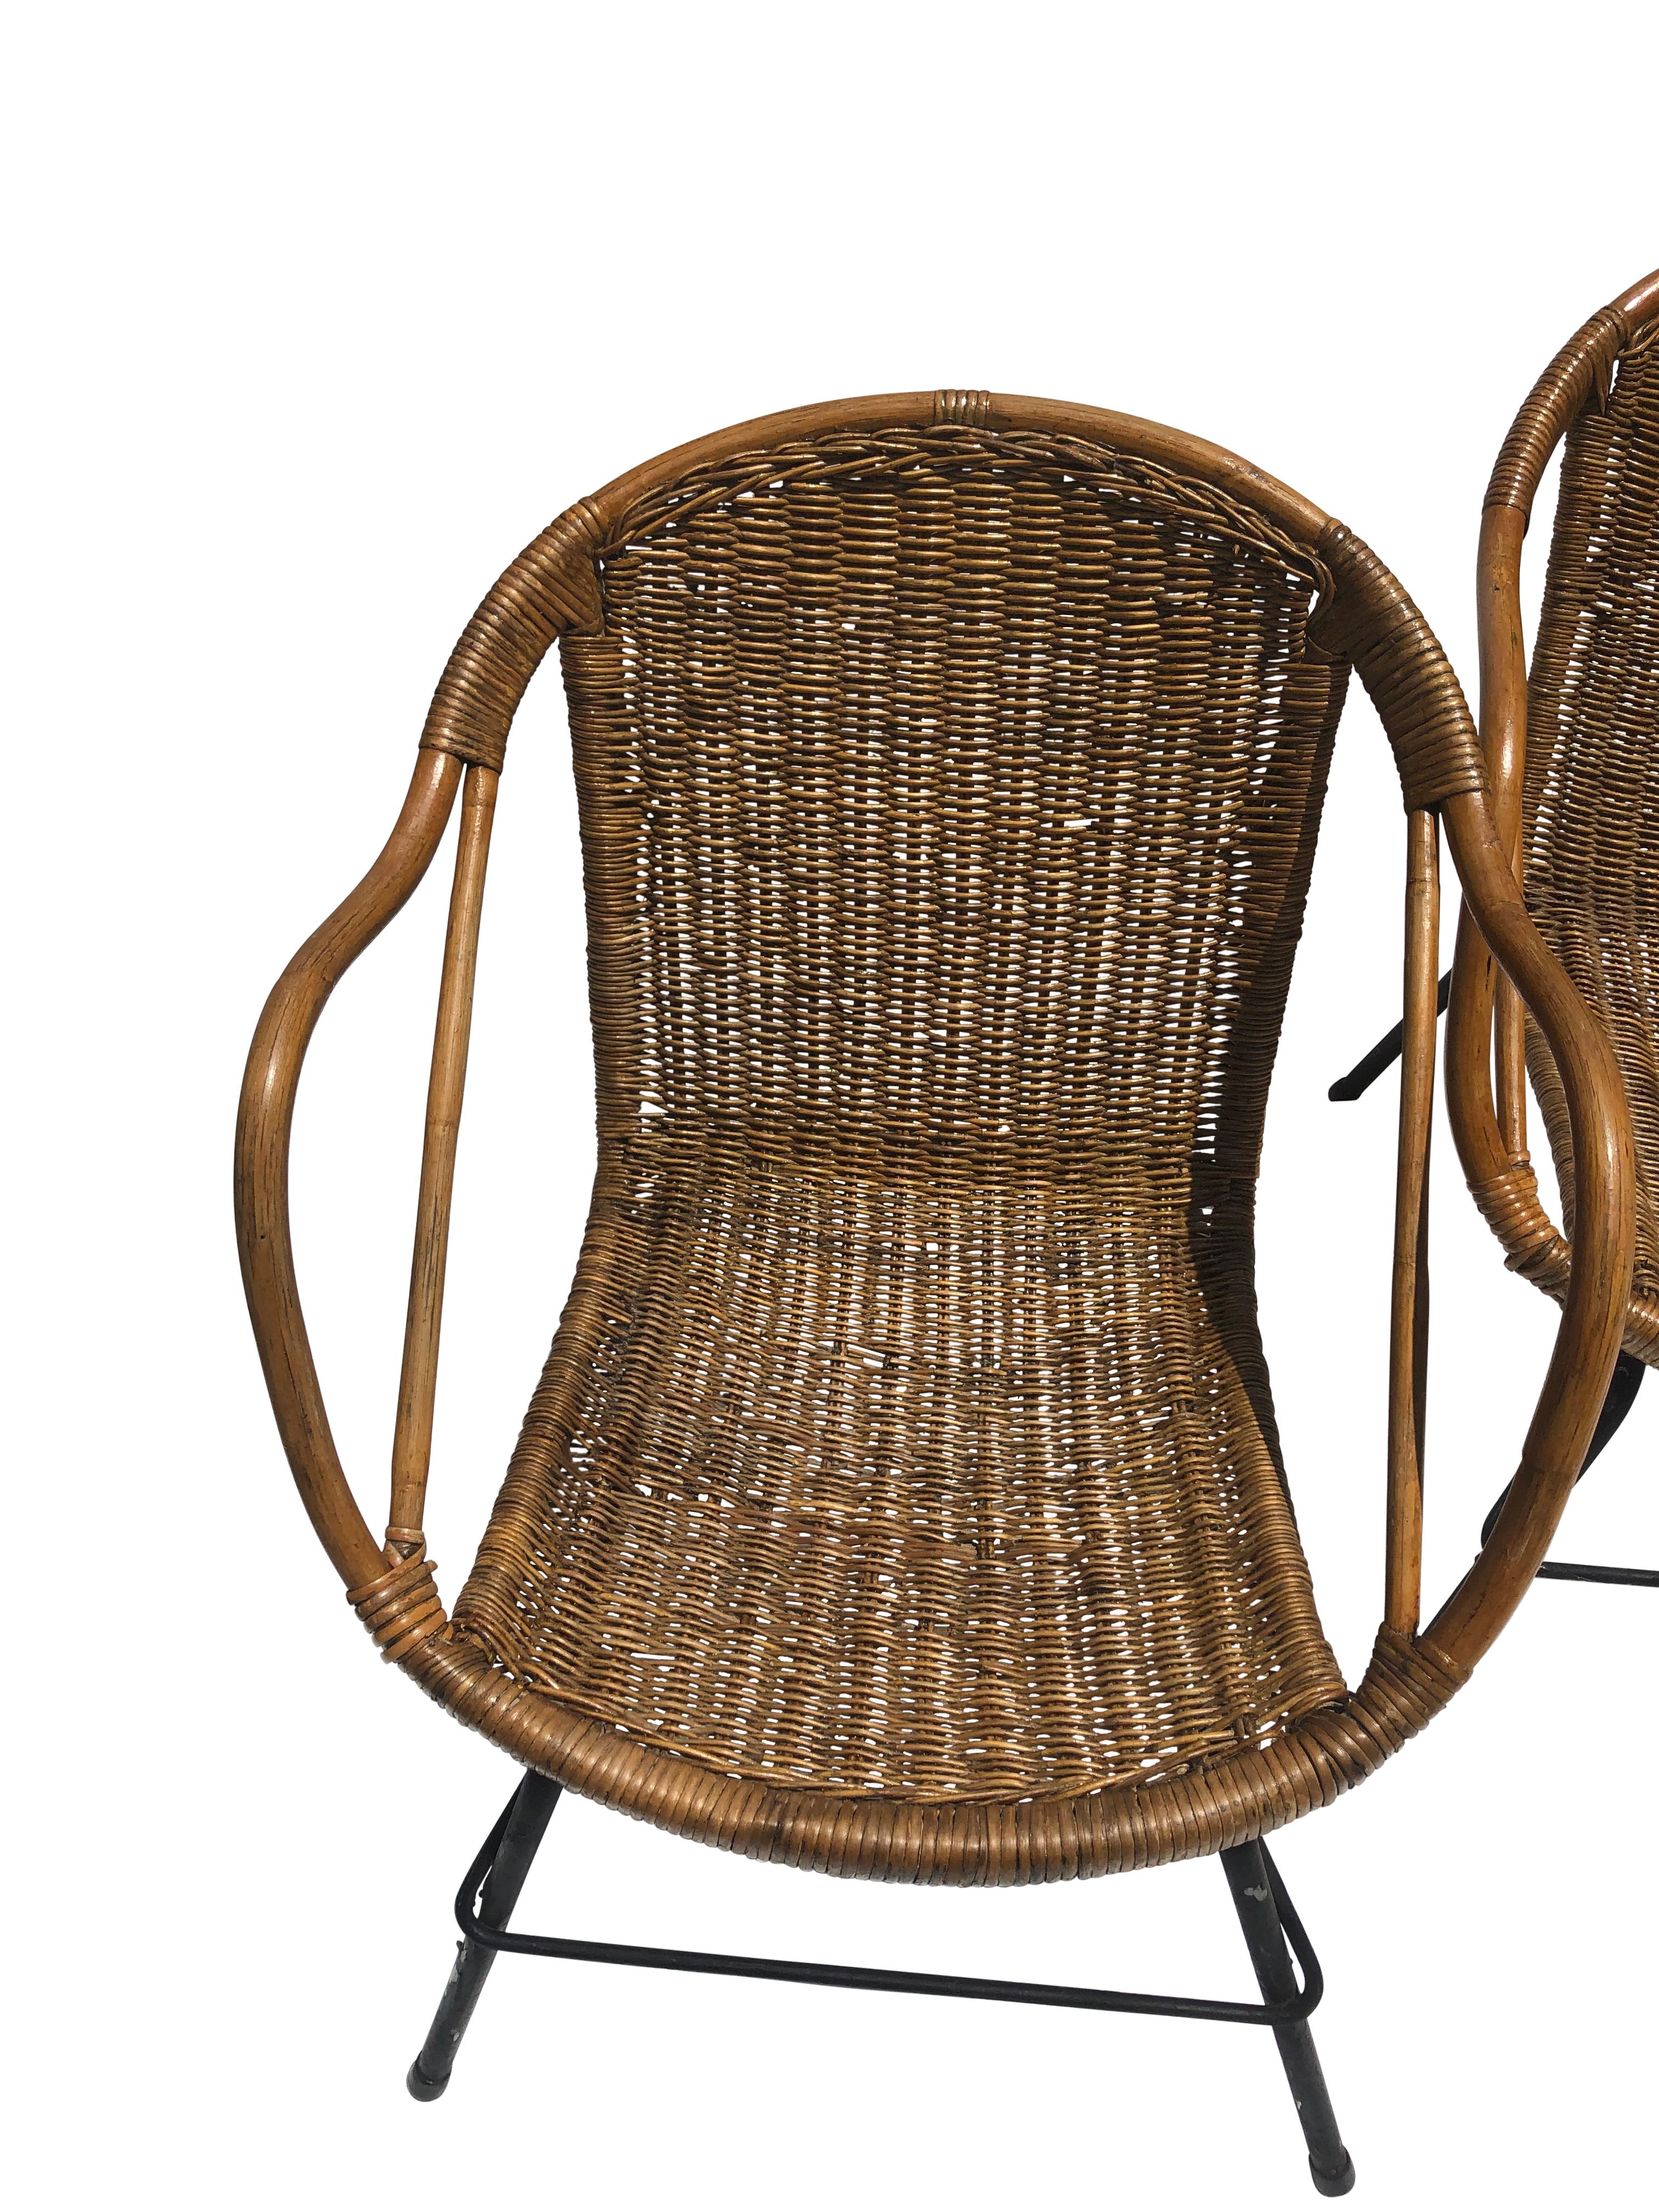 Set of 4 Vintage Italian wicker bucket chairs with black iron legs. Some wicker losses. Seat height is 14” and interior width is 17.5”. Finish has been refreshed.
 